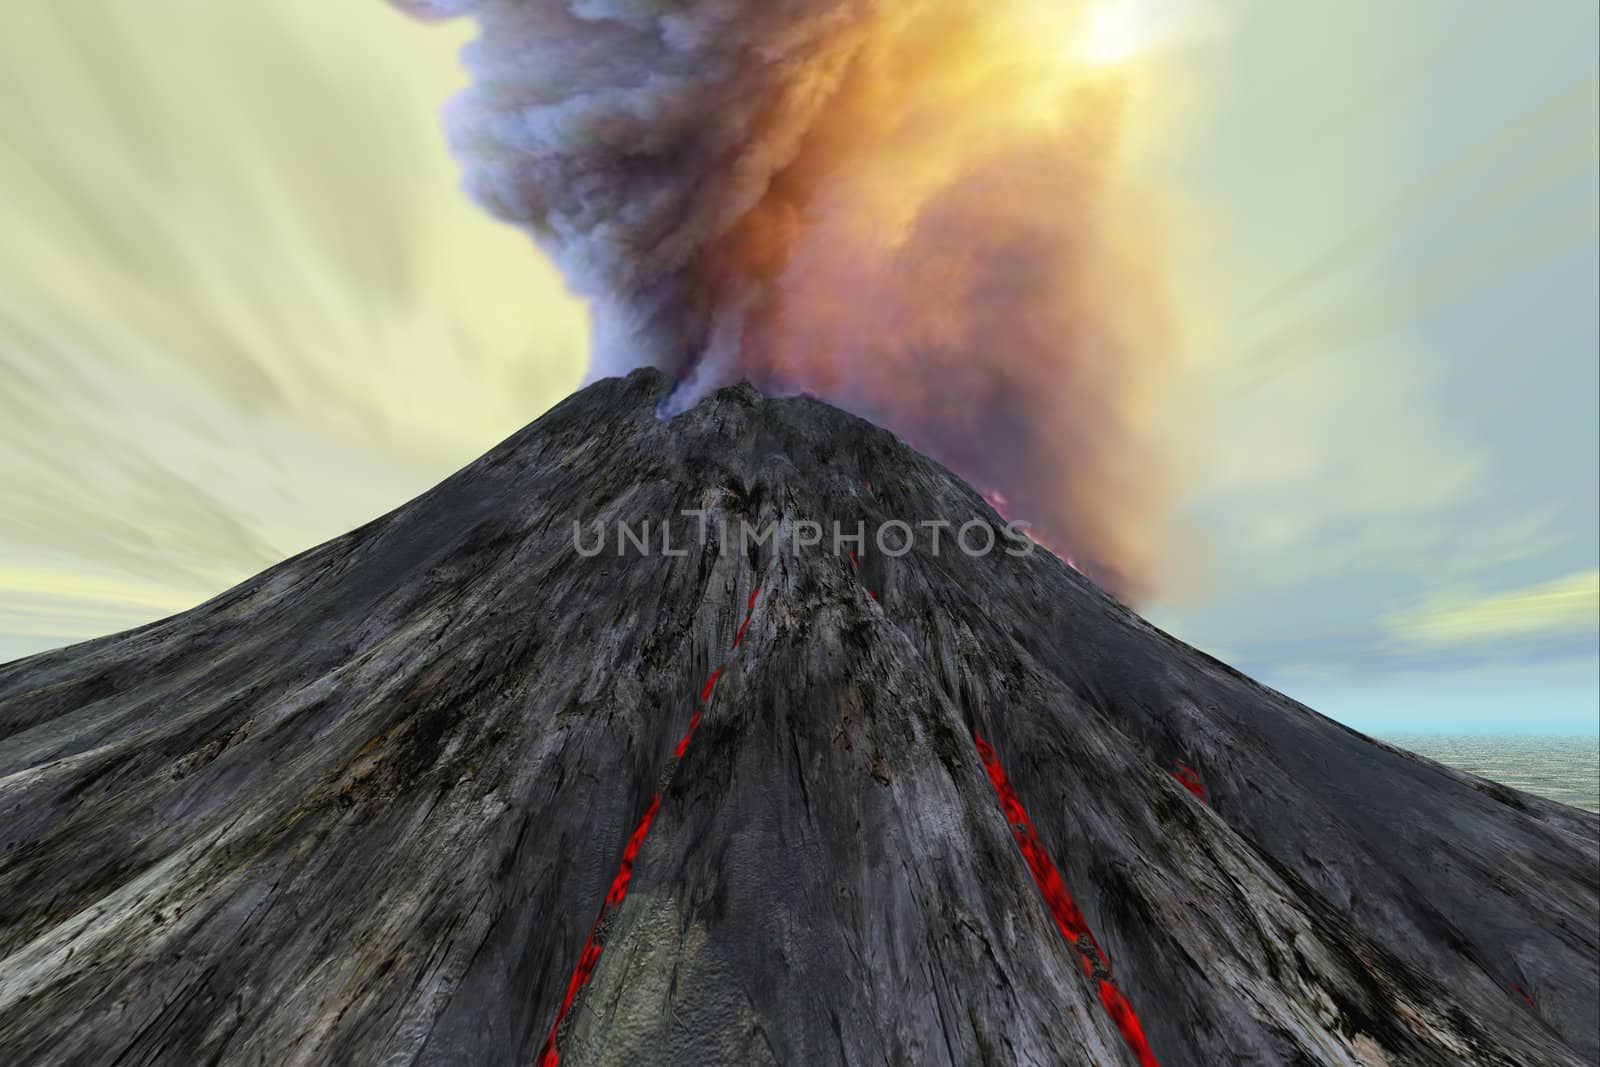 An active volcano belches smoke and ash into the sky.